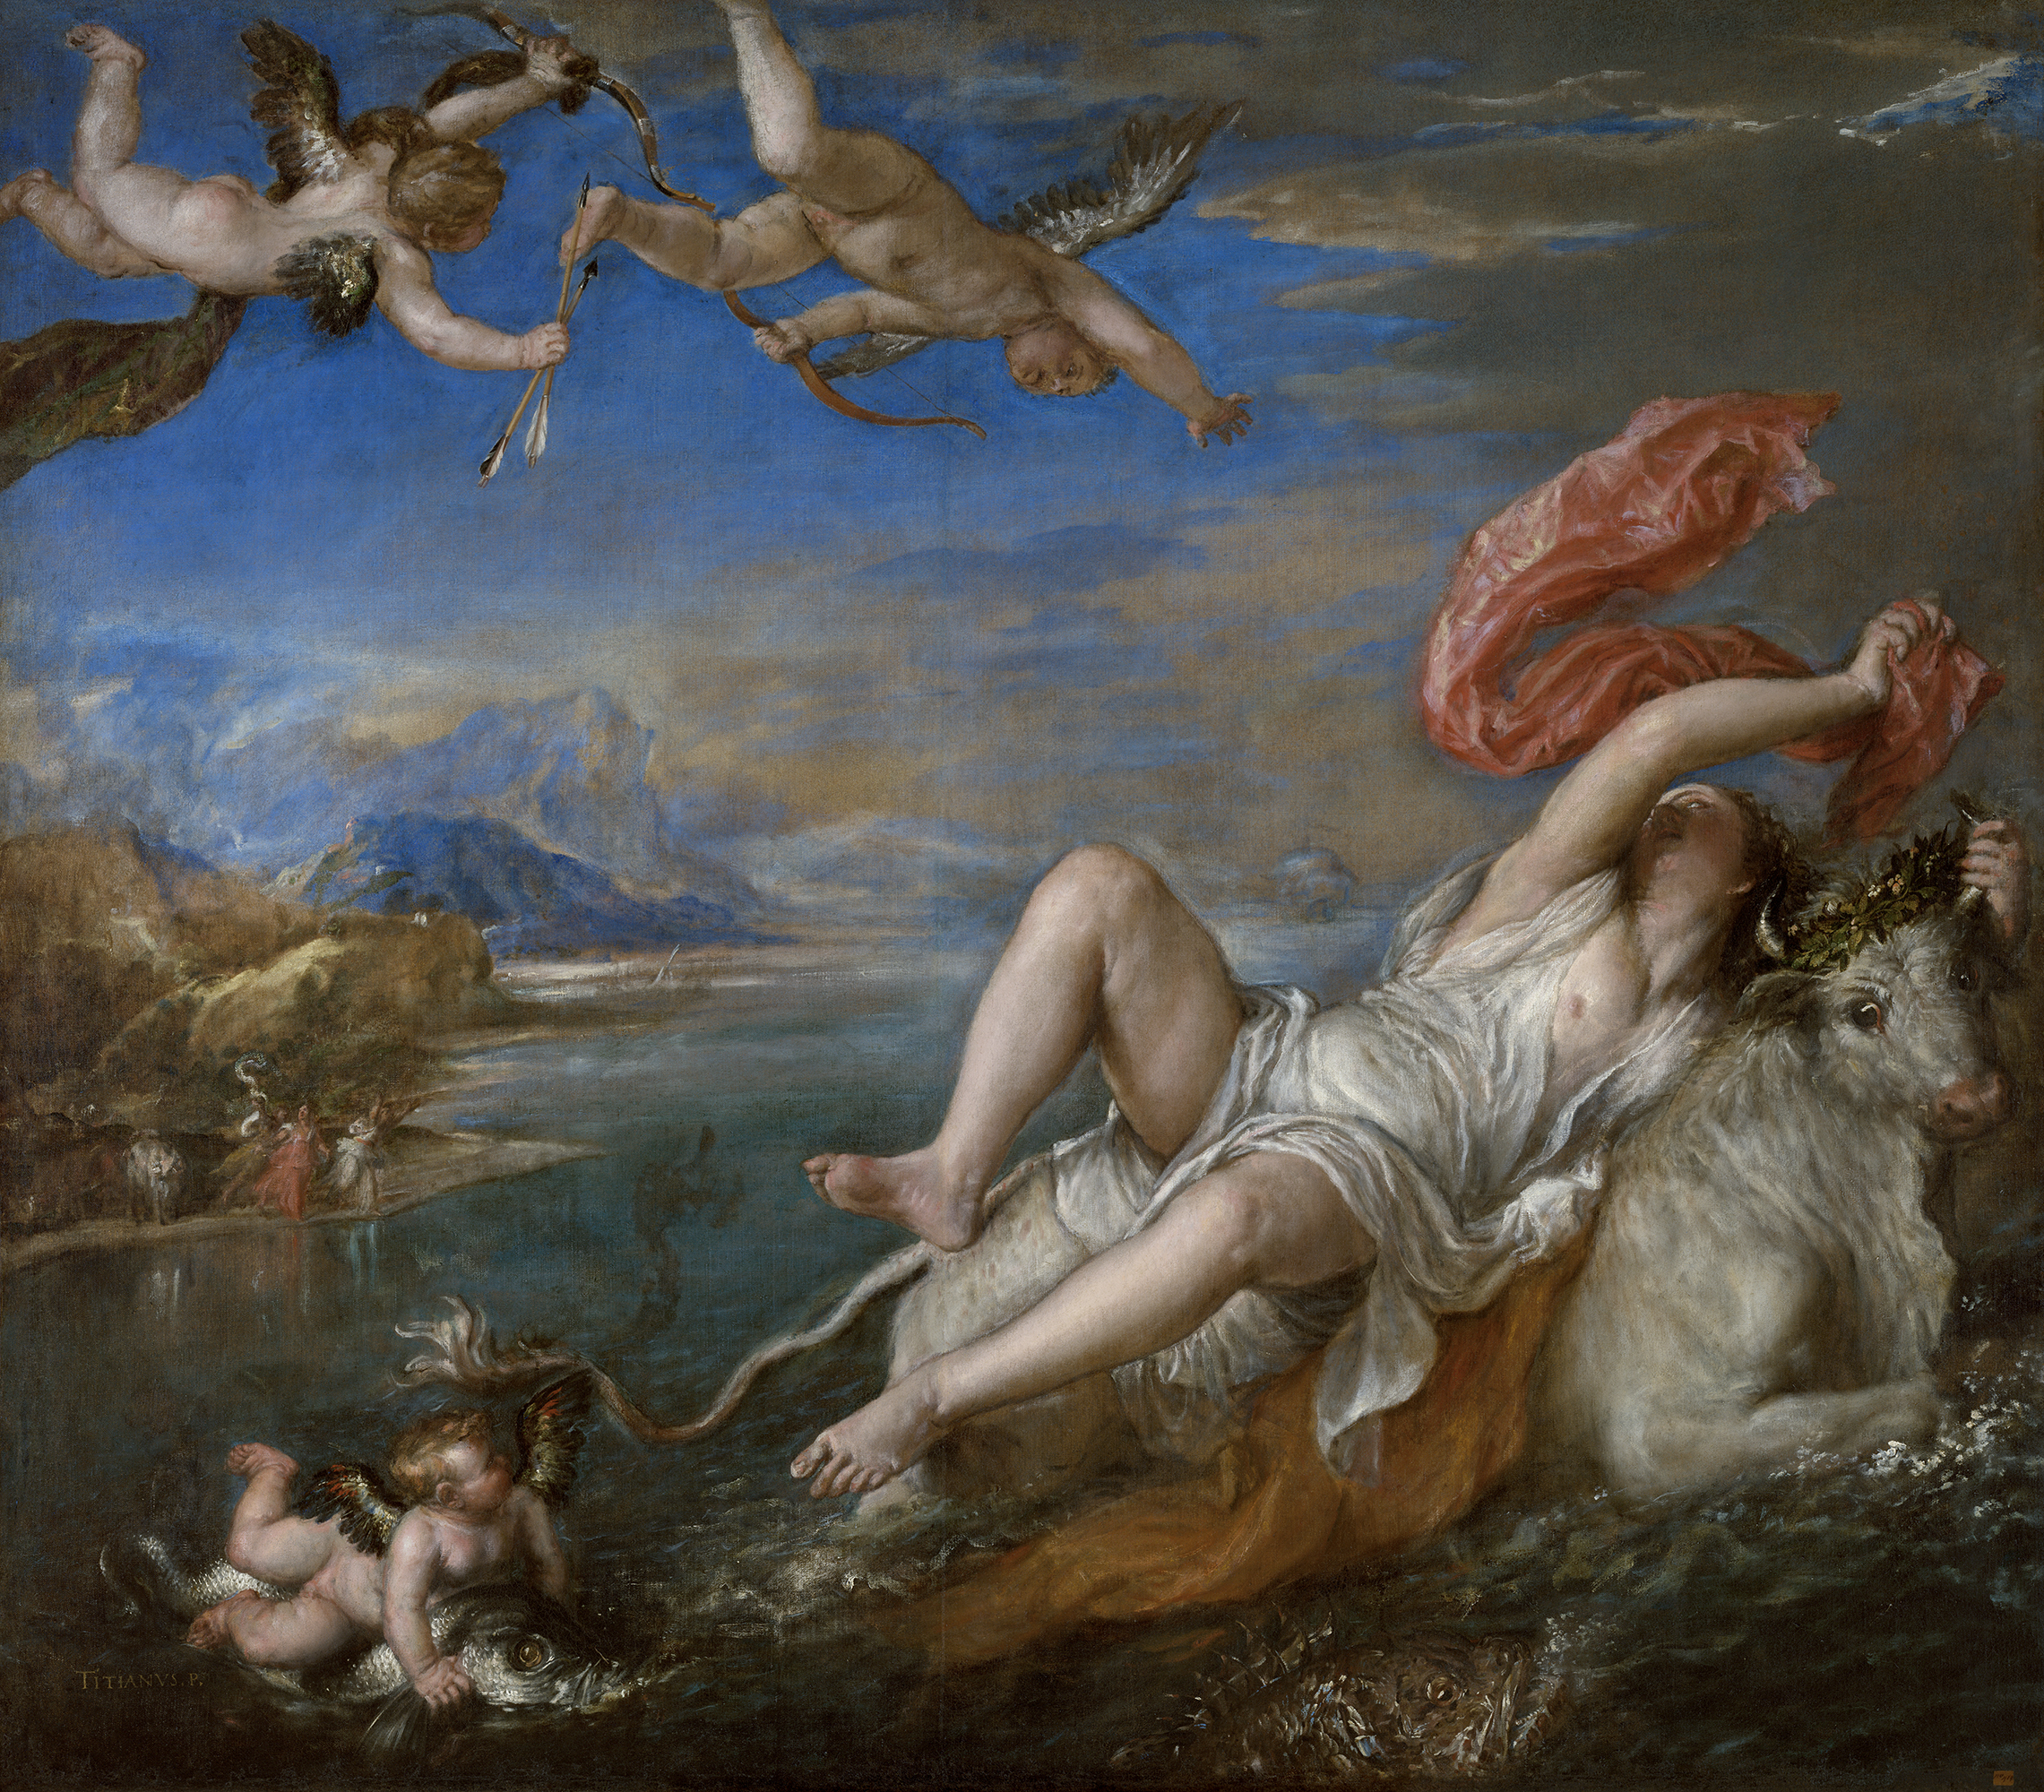 The painting depicts Europa on the back of a bull, just off the shore of her homeland. She holds a waving red scarf. A sea monster and a small angel on a dolphin are depicted in the foreground of the painting. On the top, two more angels are flying in pursuit, one holding a bow and arrows.